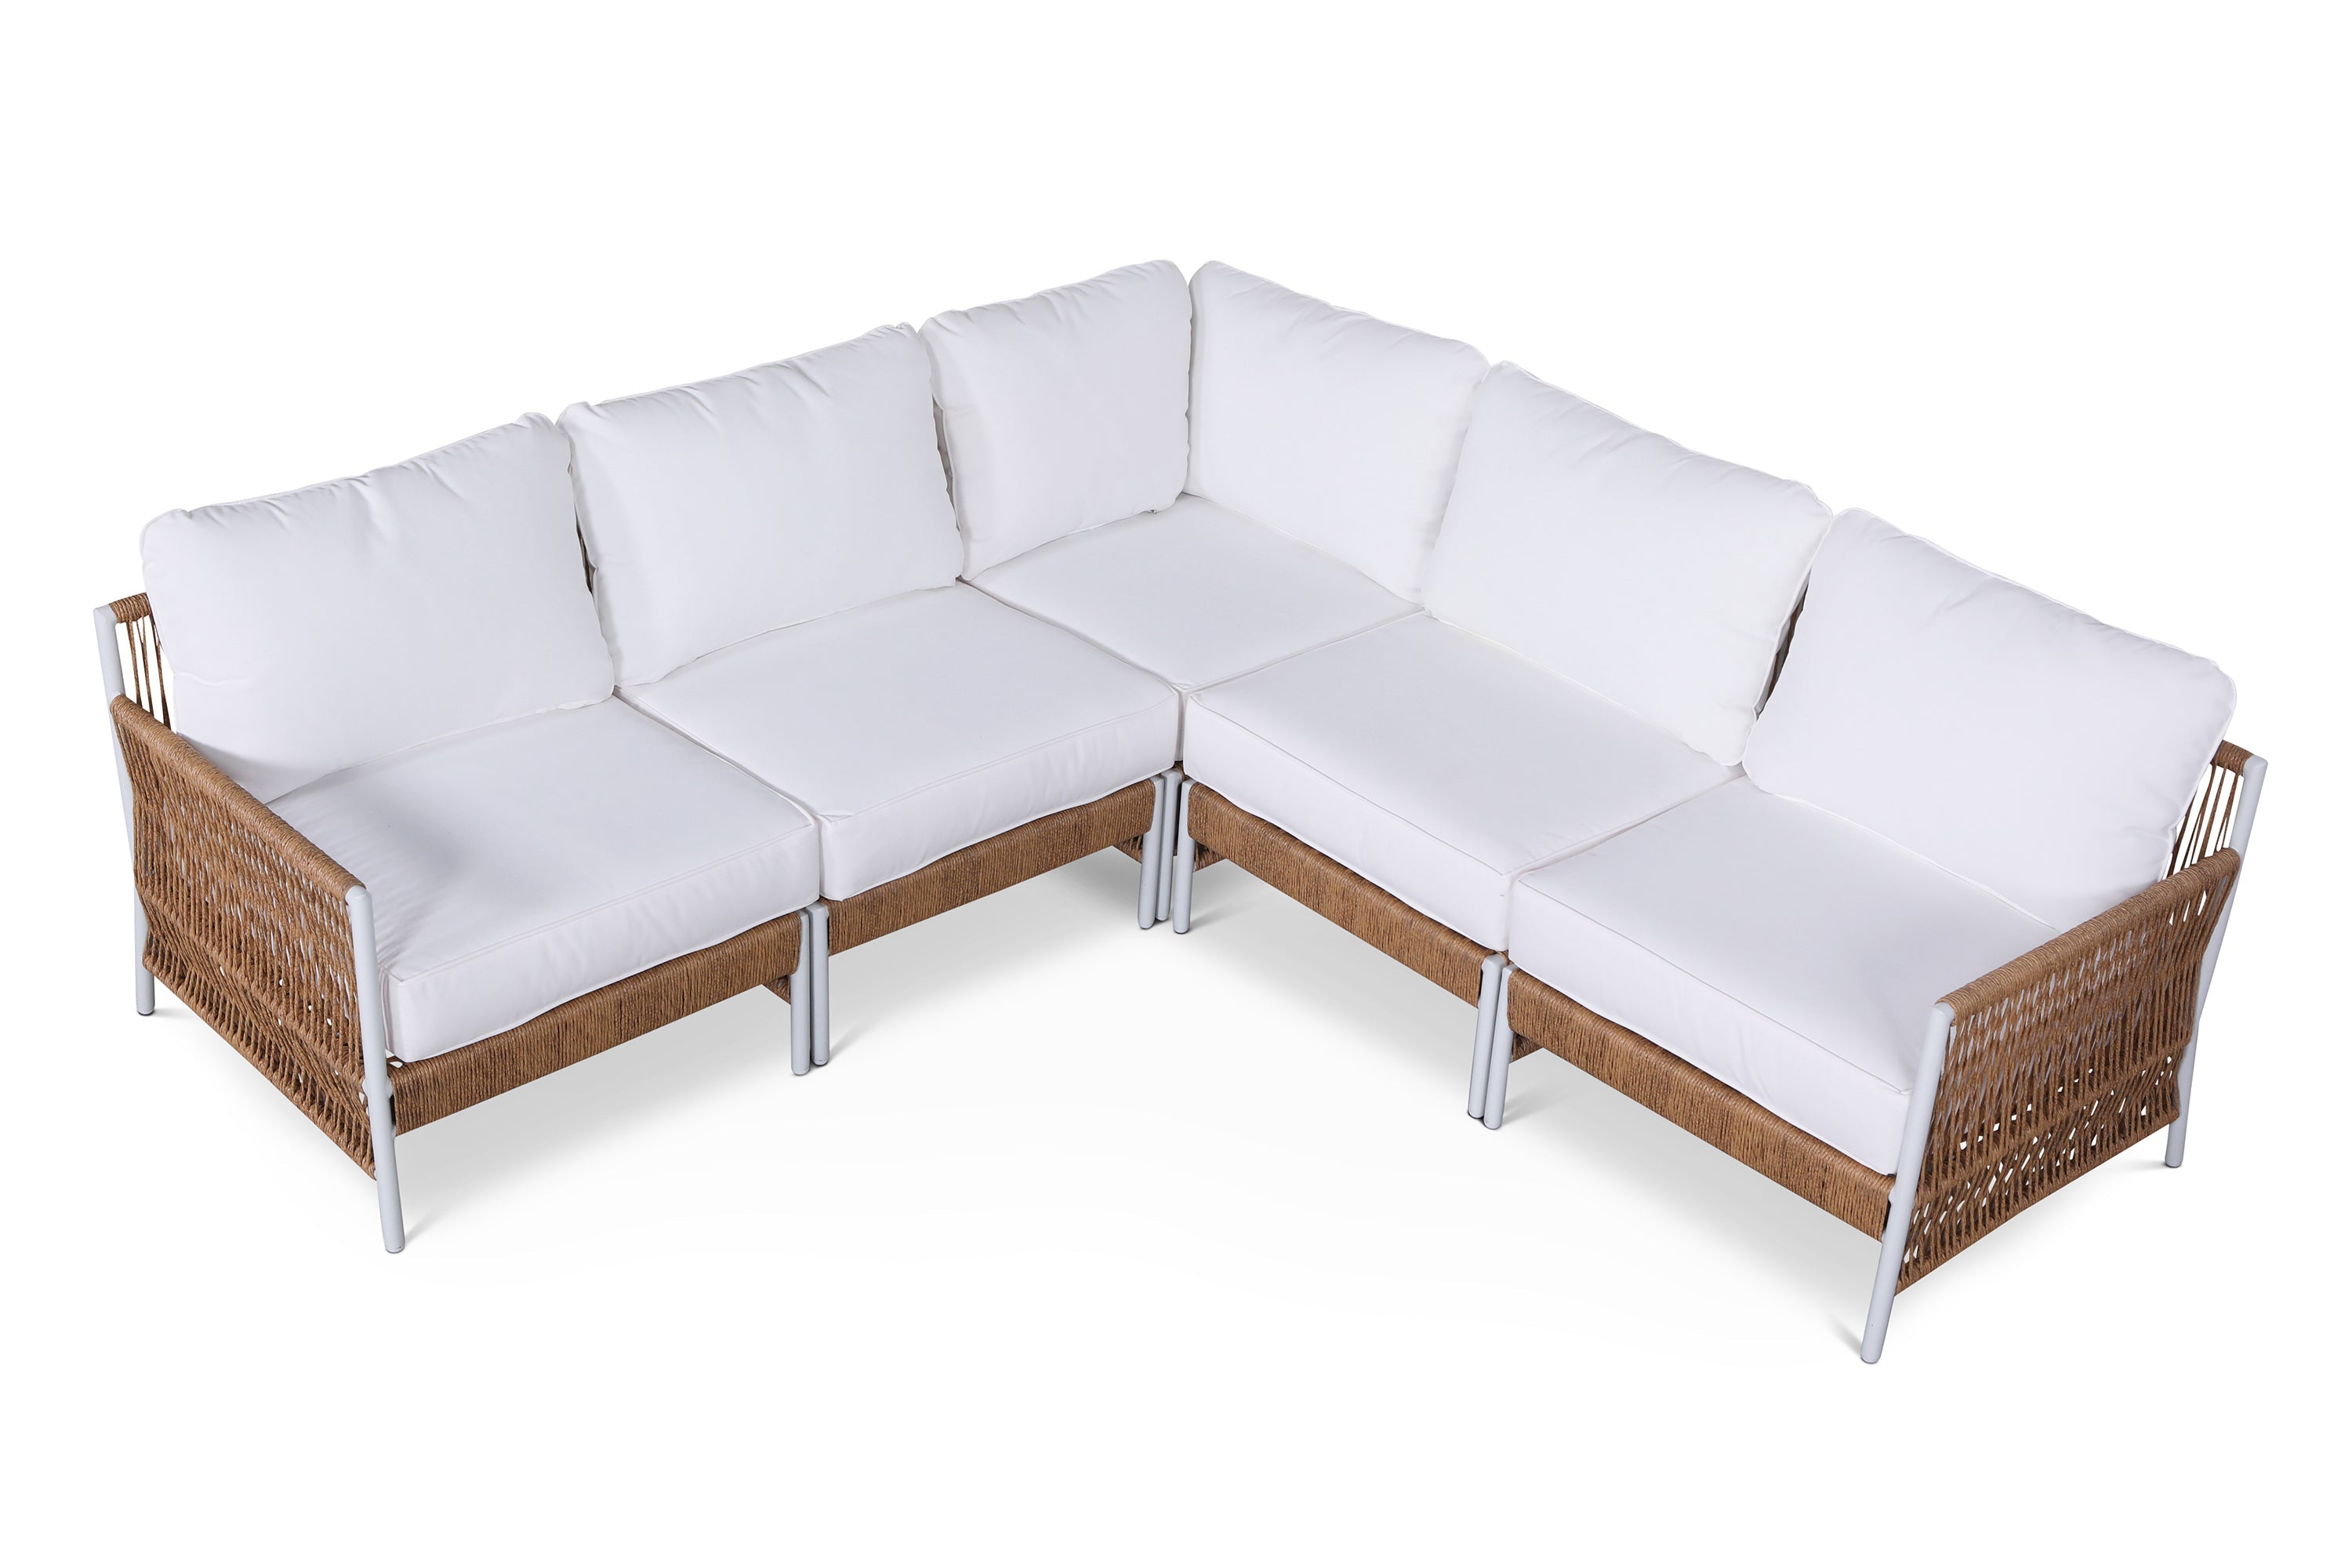 Olivia Ivory 5 Piece Outdoor Roped Wicker Sectional